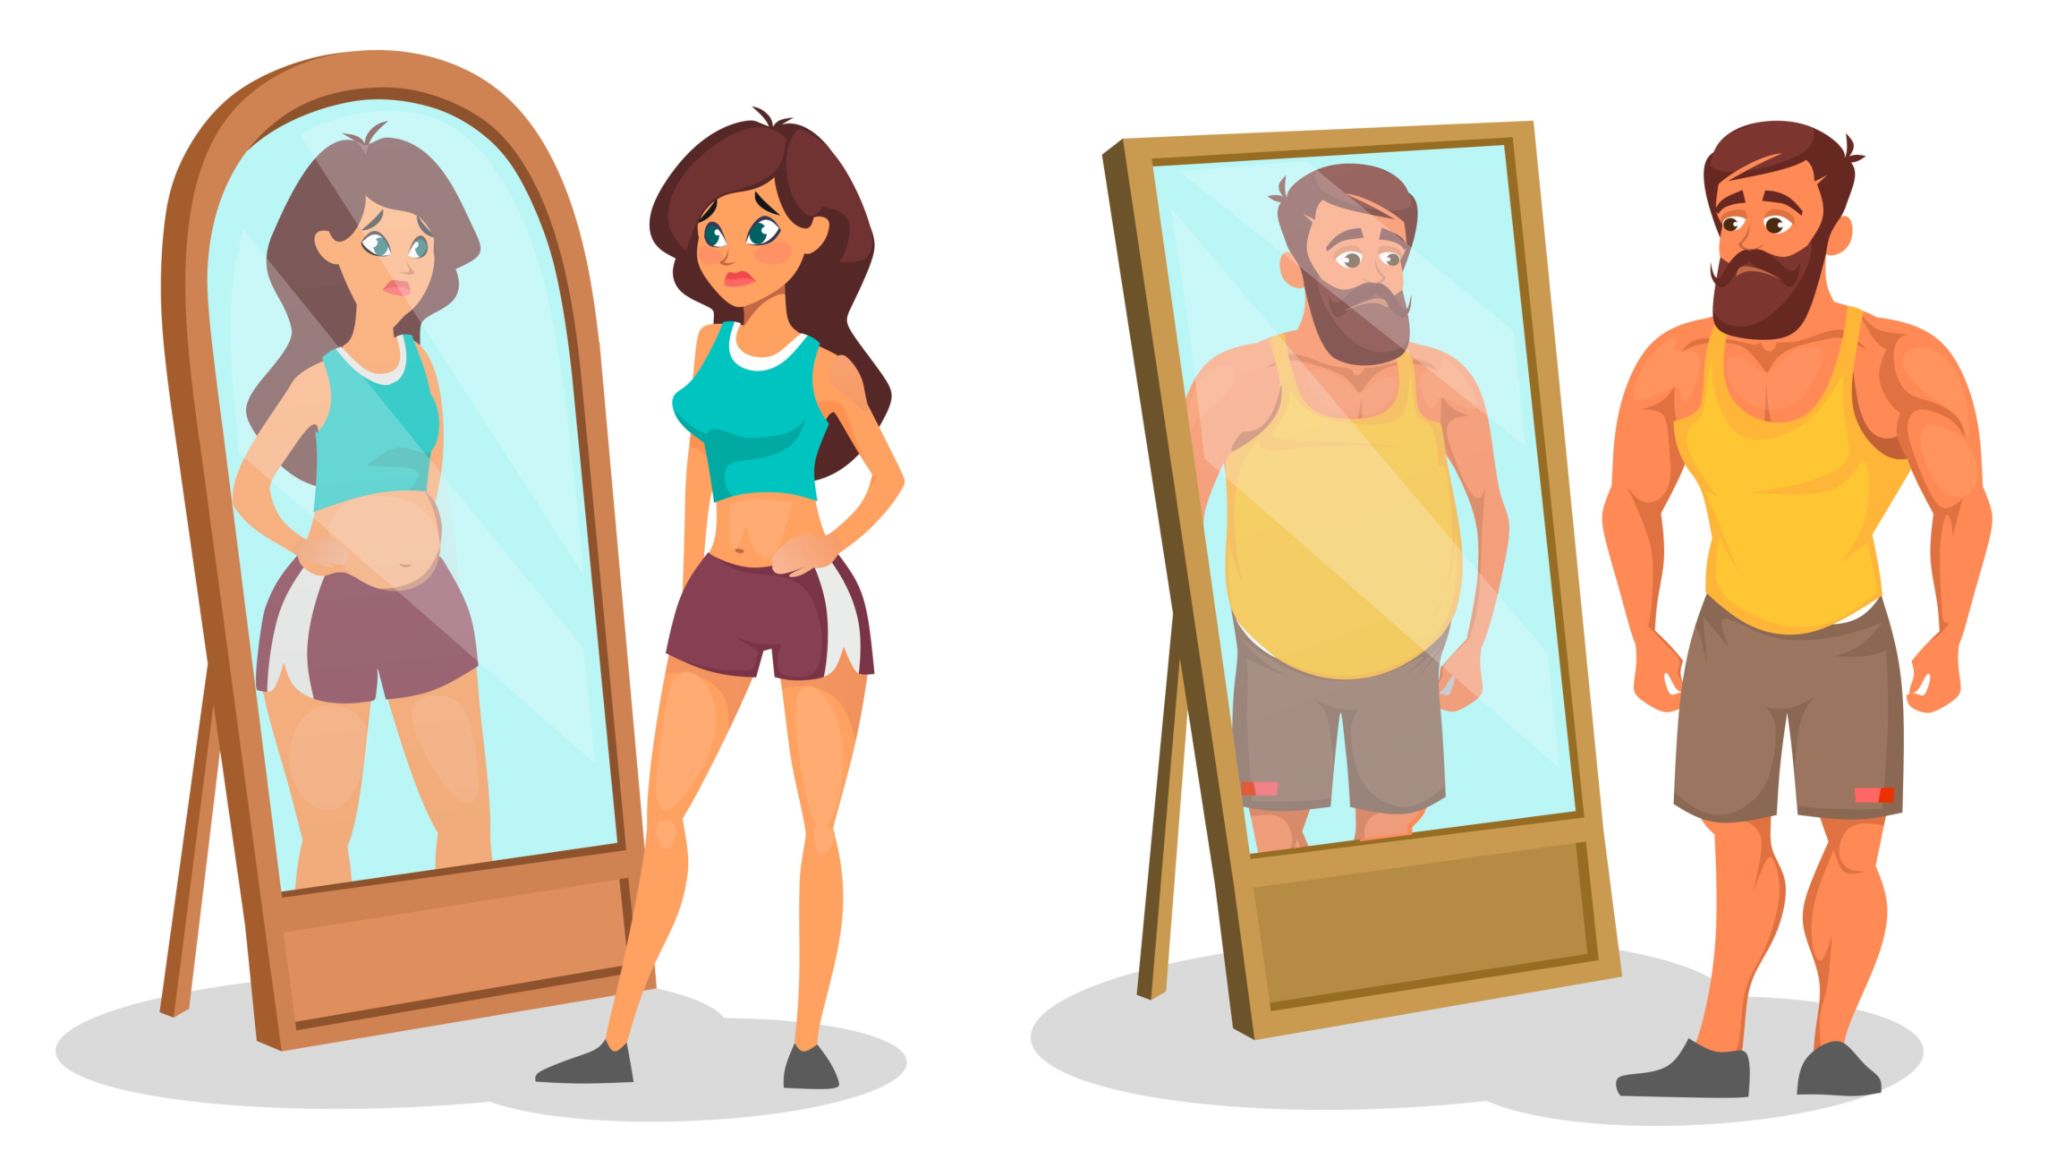 Addressing body image concerns in relation to physical health